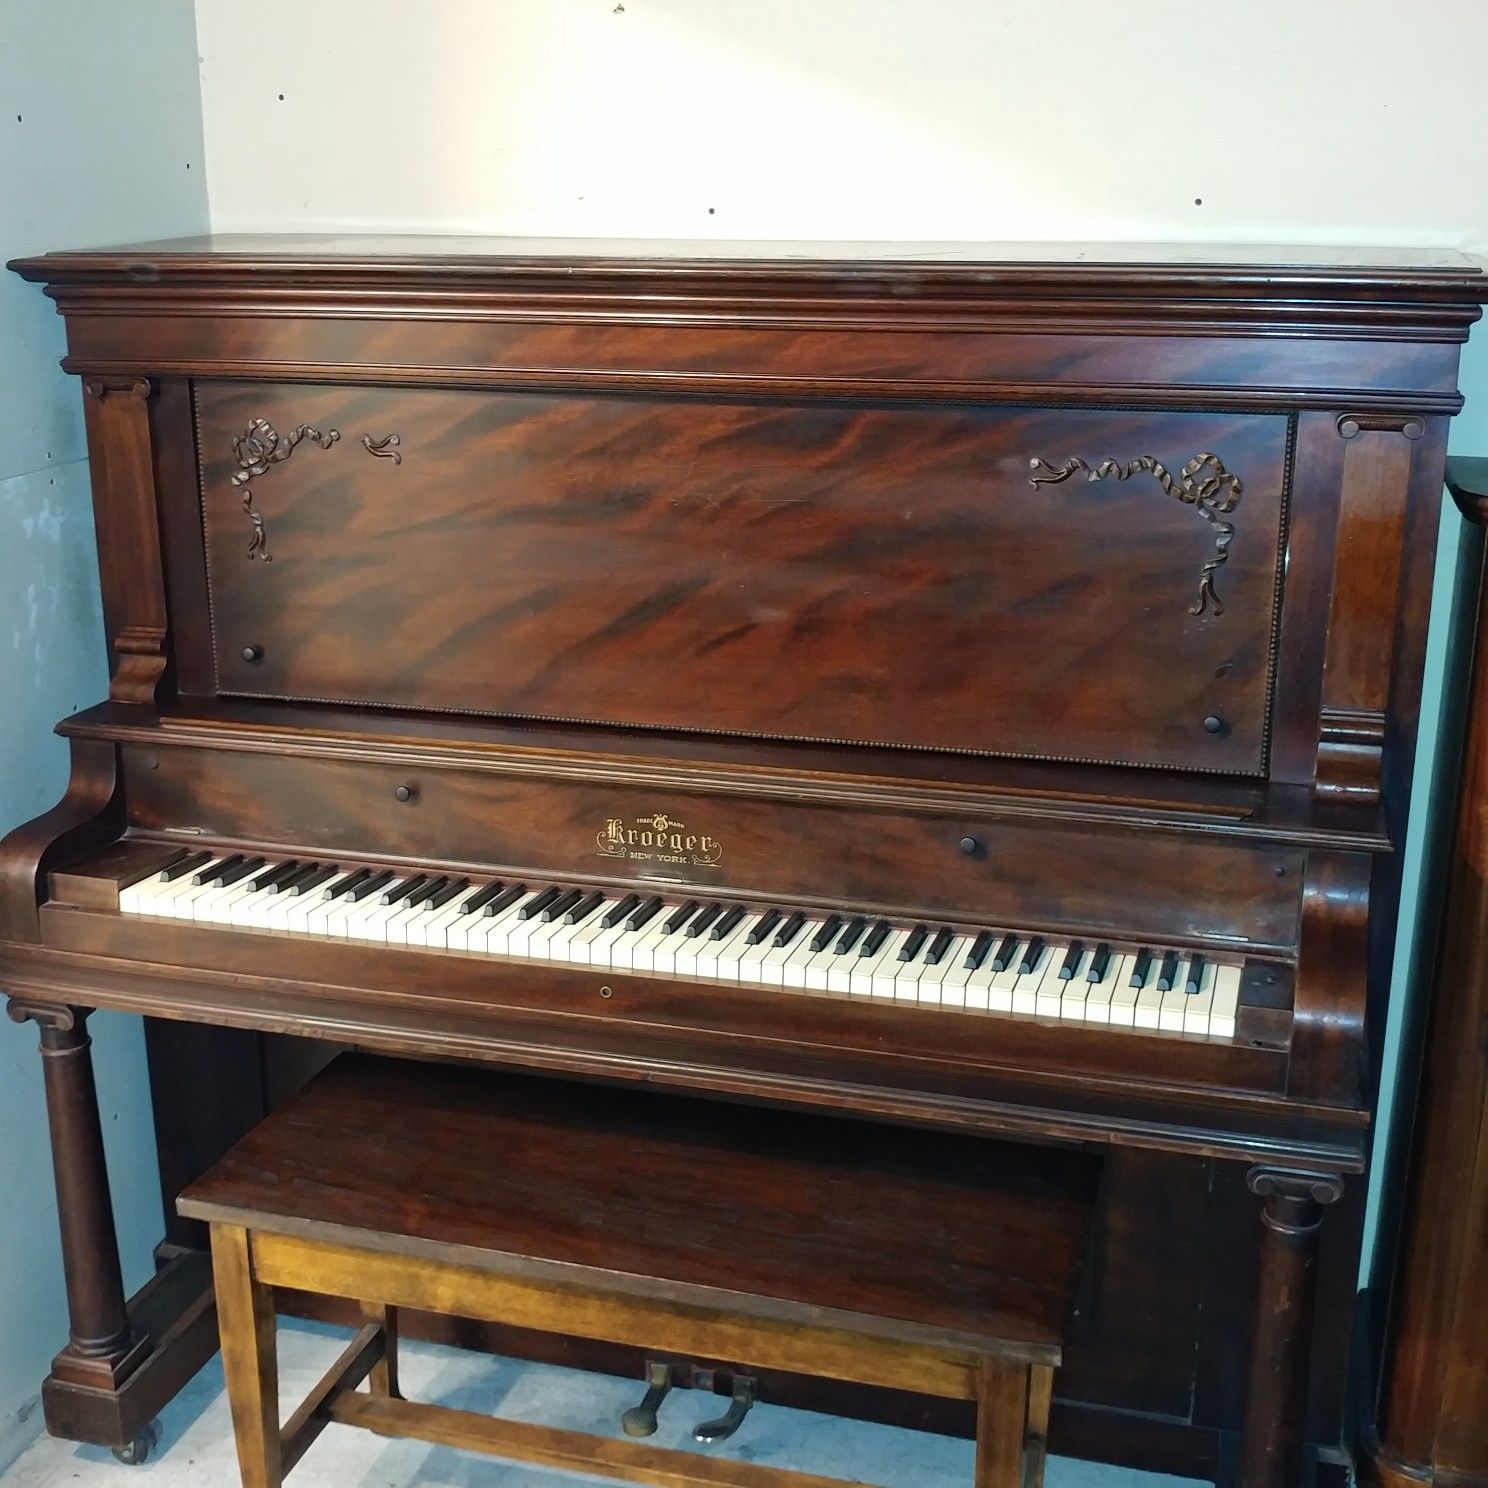 Kroeger 1920s full upright. Delivery and tuning available